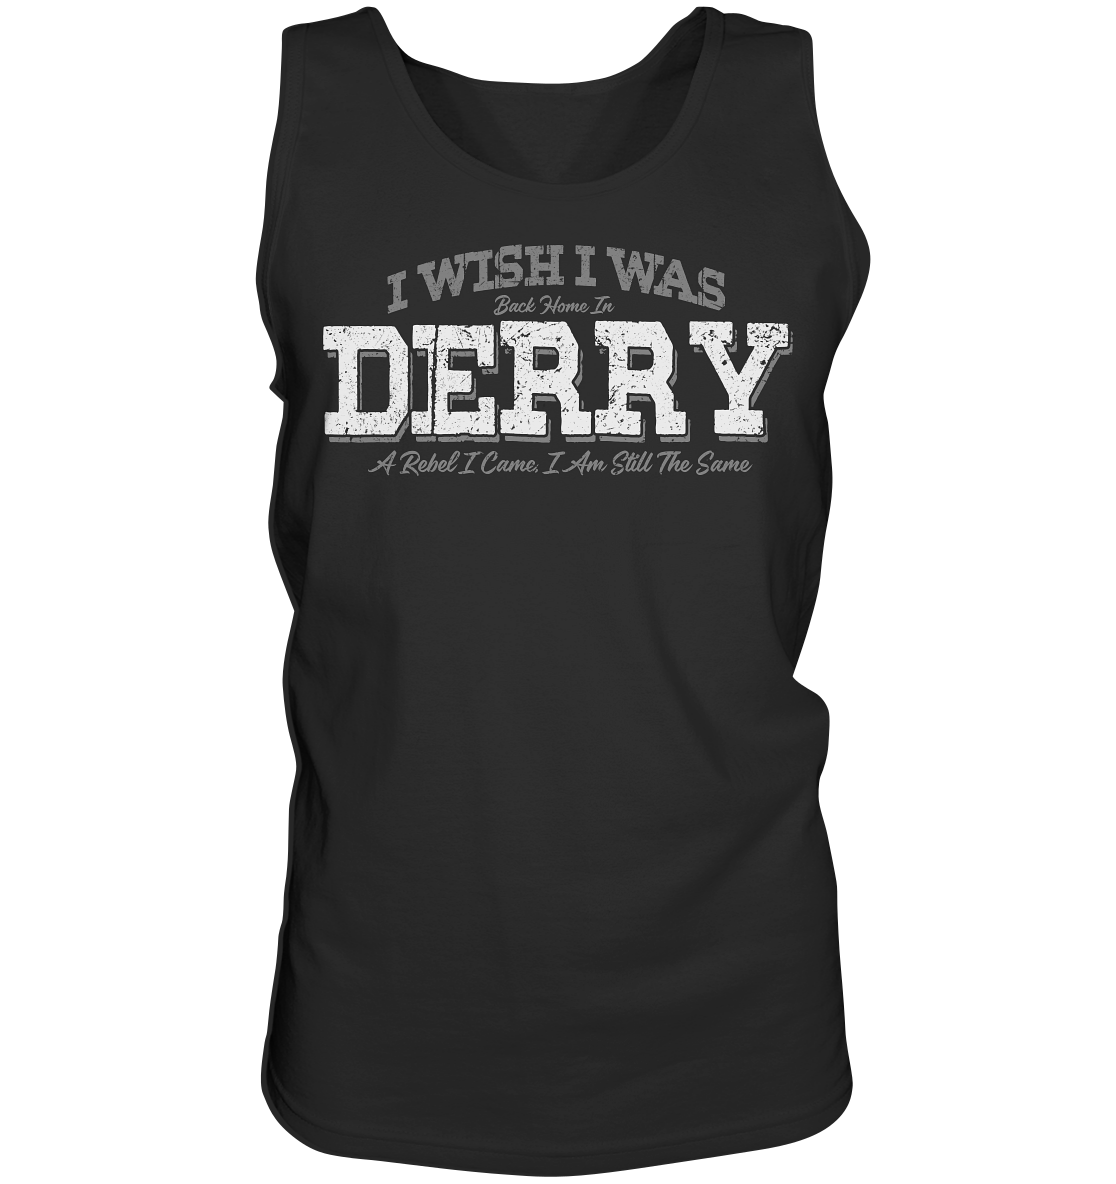 I Wish I Was Back Home In Derry - Tank-Top